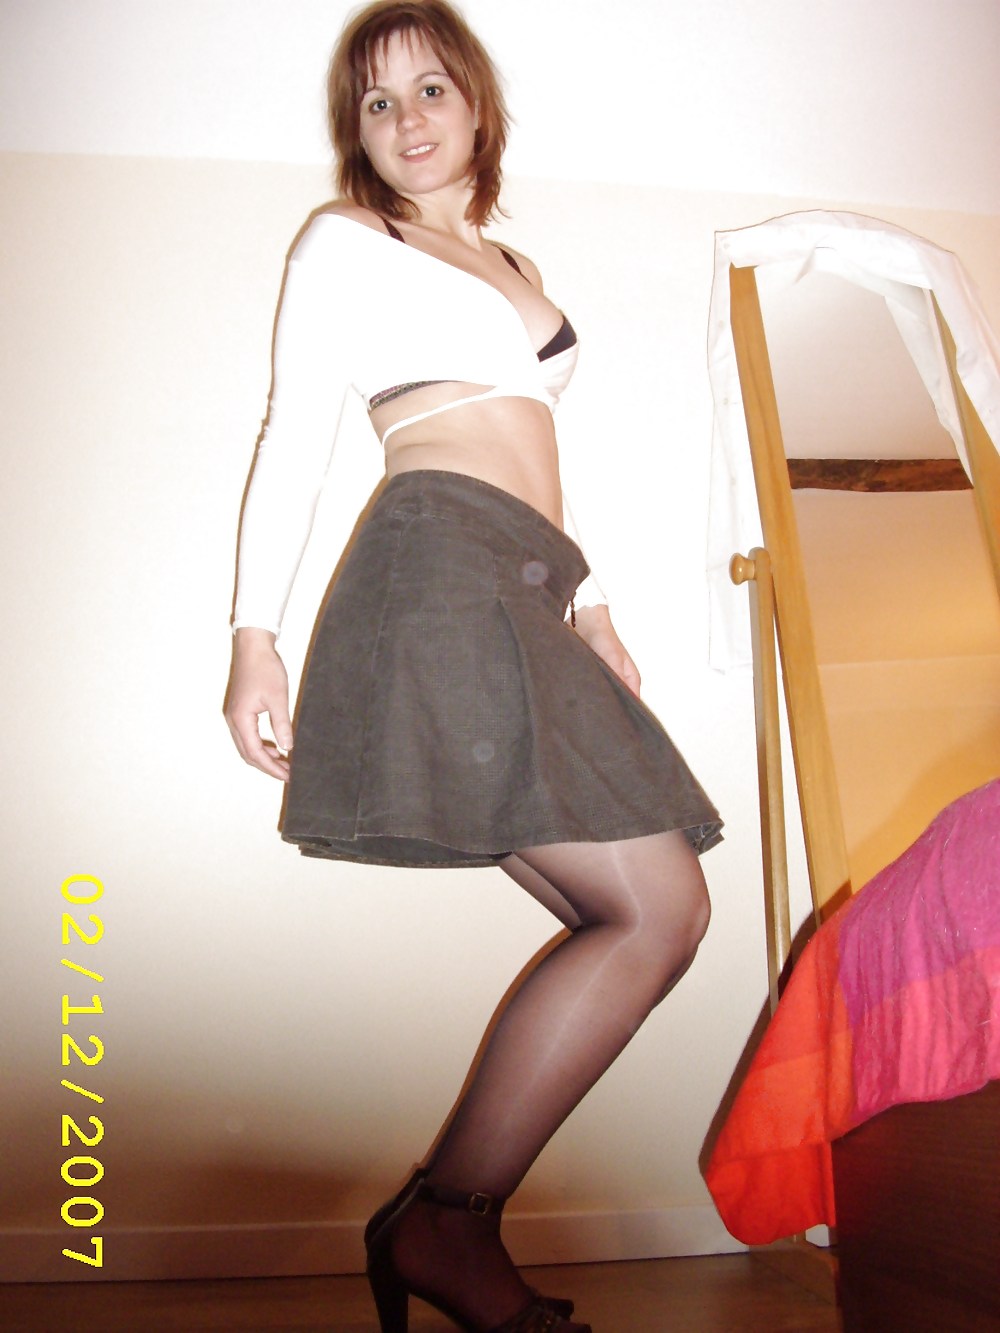 Amateur French Wife (Ctk) #2220375